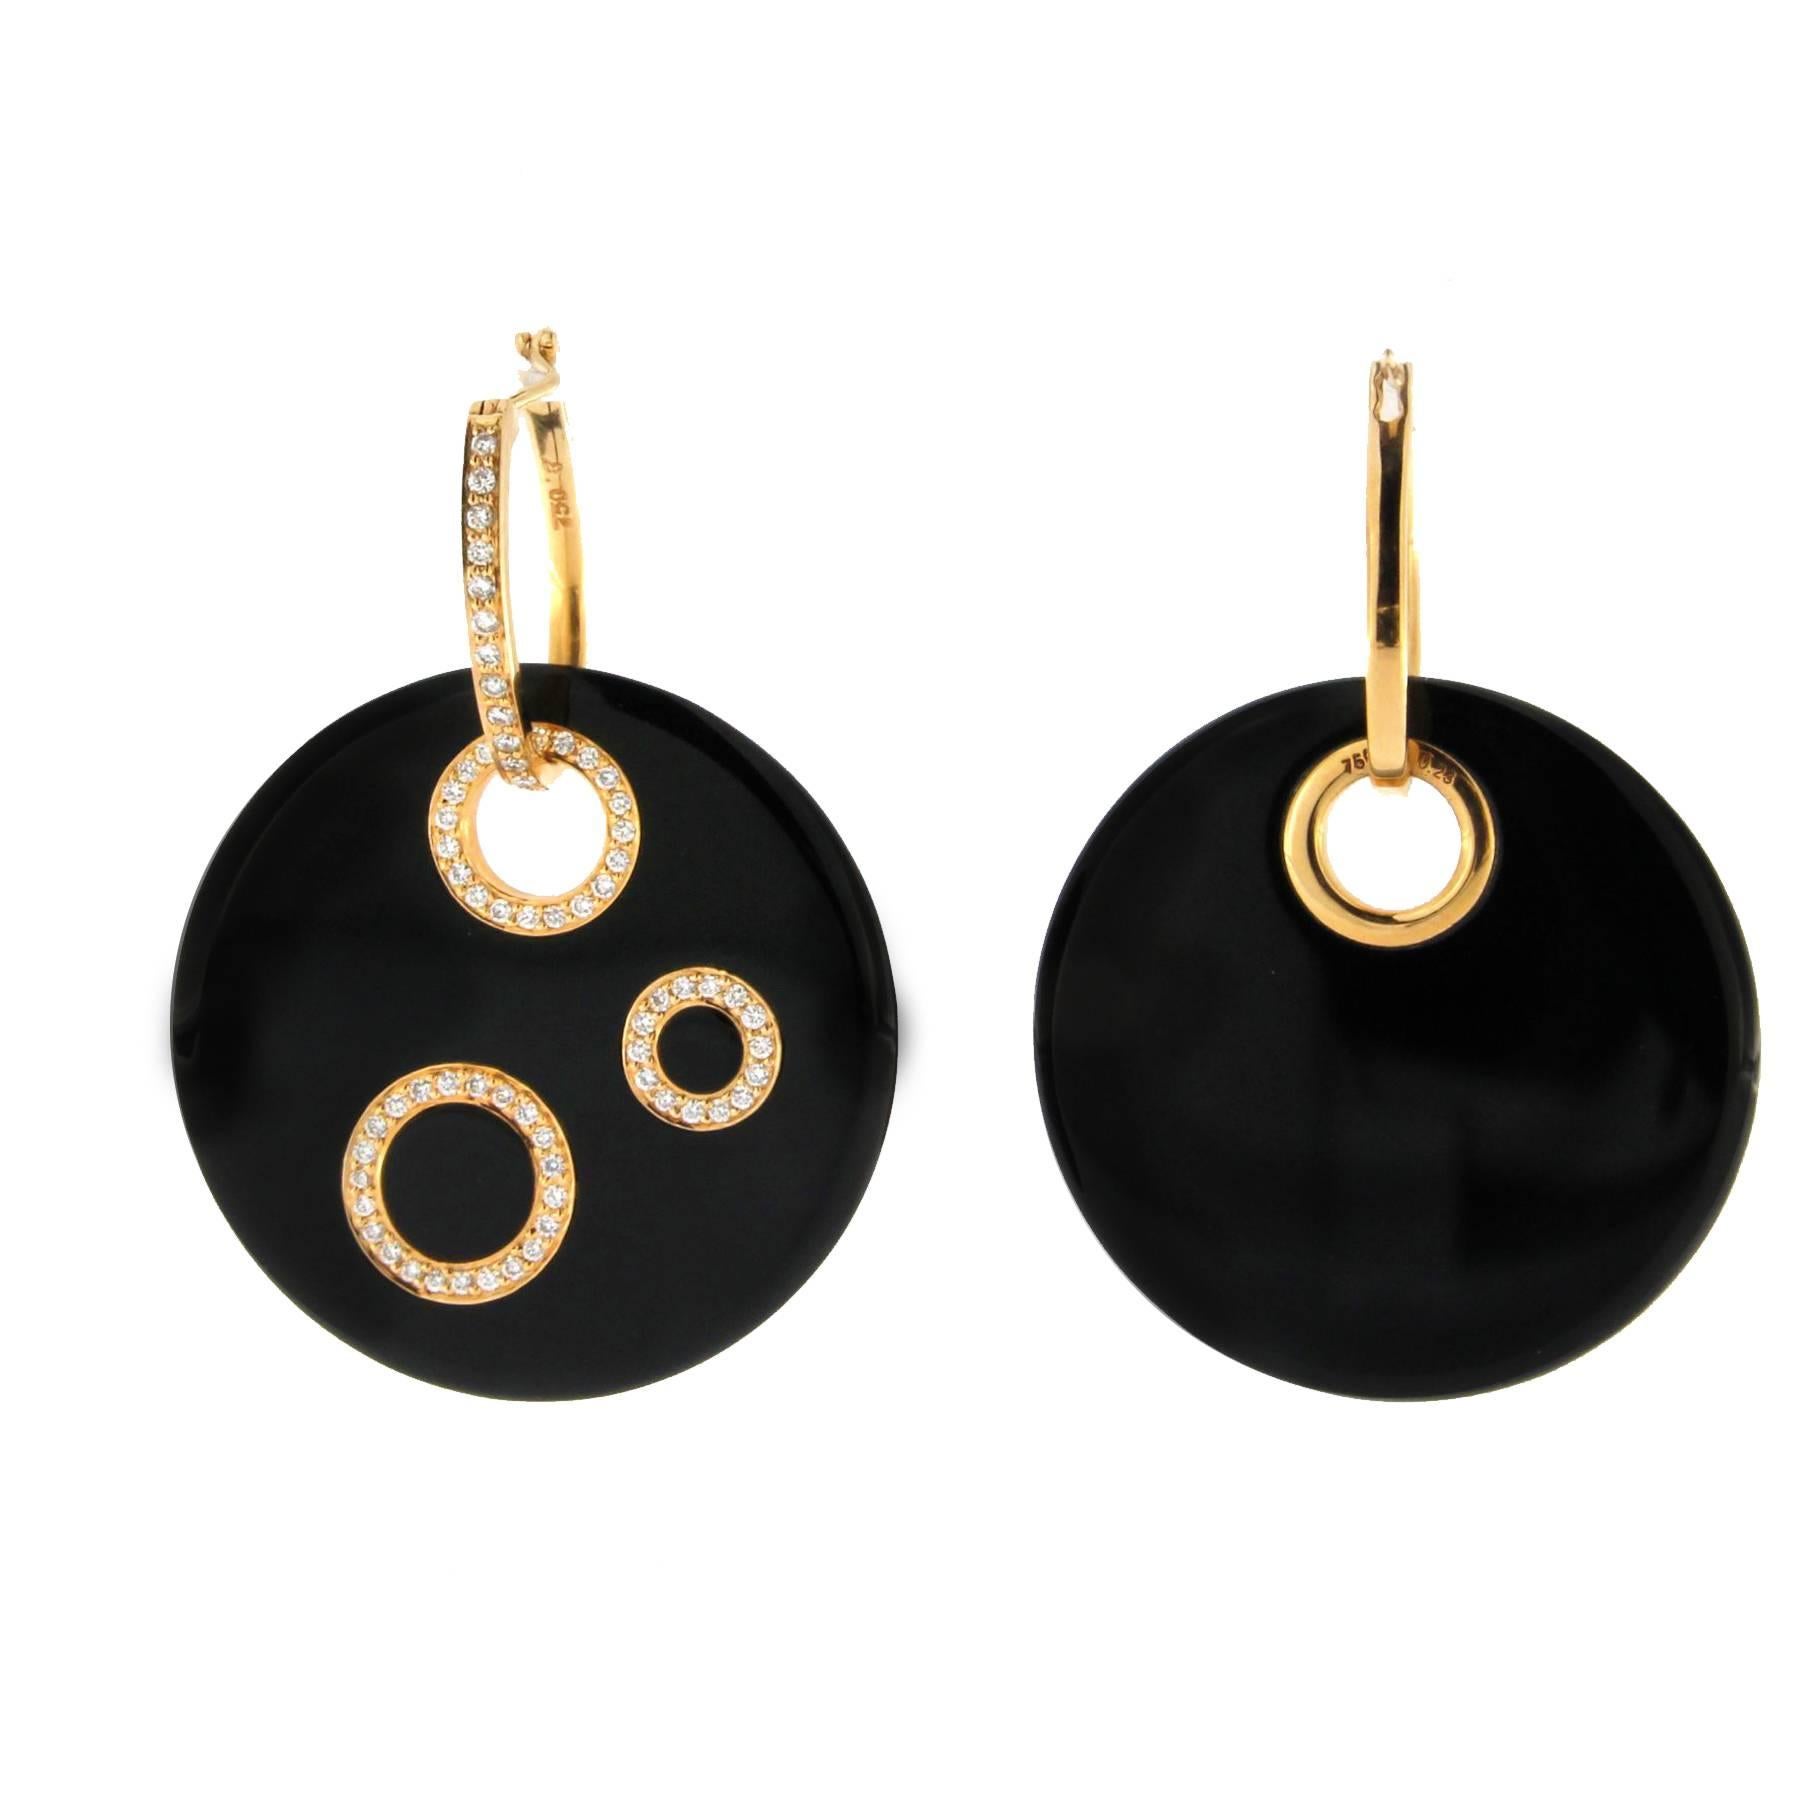 Alex Jona design collection, hand crafted in Italy, 18 karat rose gold, onyx disk hoop pendant earrings set with 0.62 carats of white diamonds.  

Alex Jona jewels stand out, not only for their special design and for the excellent quality of the